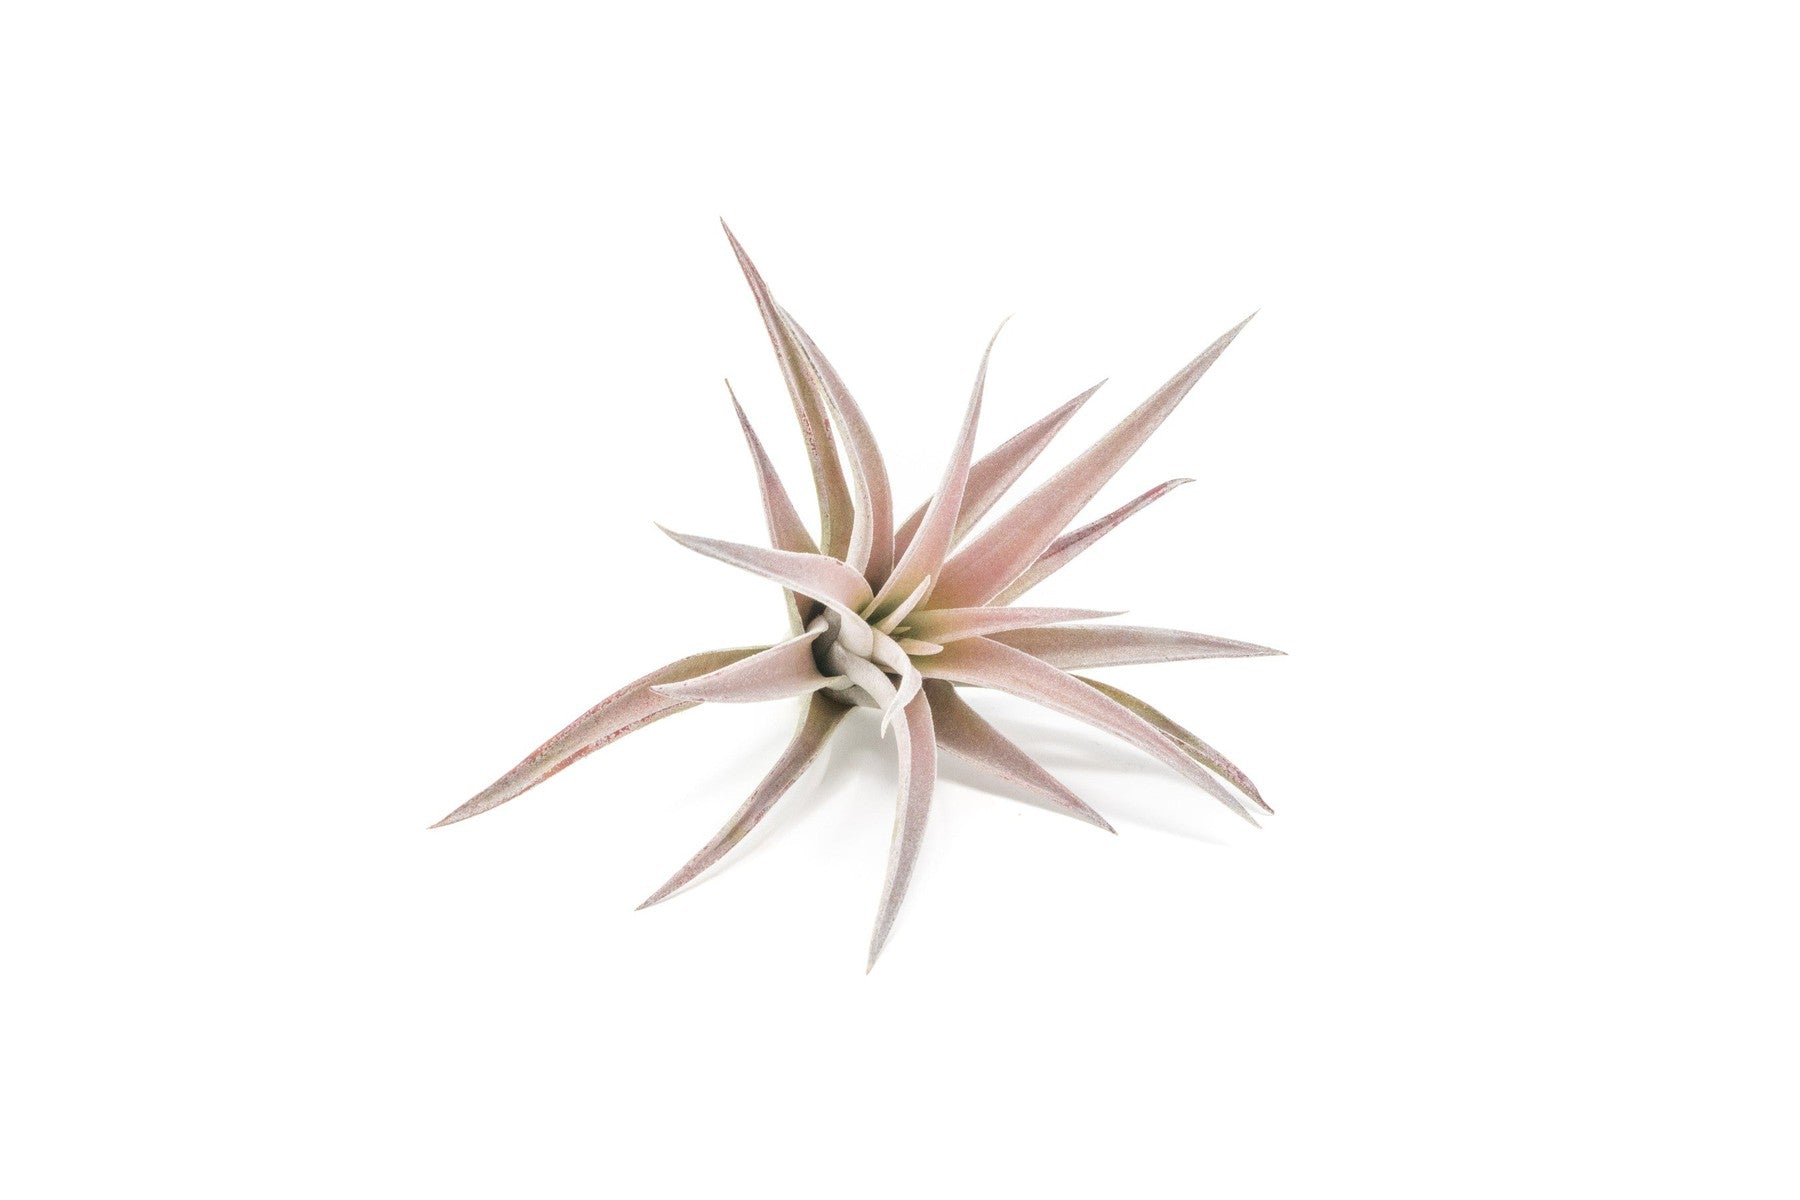 SALE - Tillandsia Harrisii Air Plants - Set of 10, 15, or 20 - 60% Off-airplant-The Succulent Source